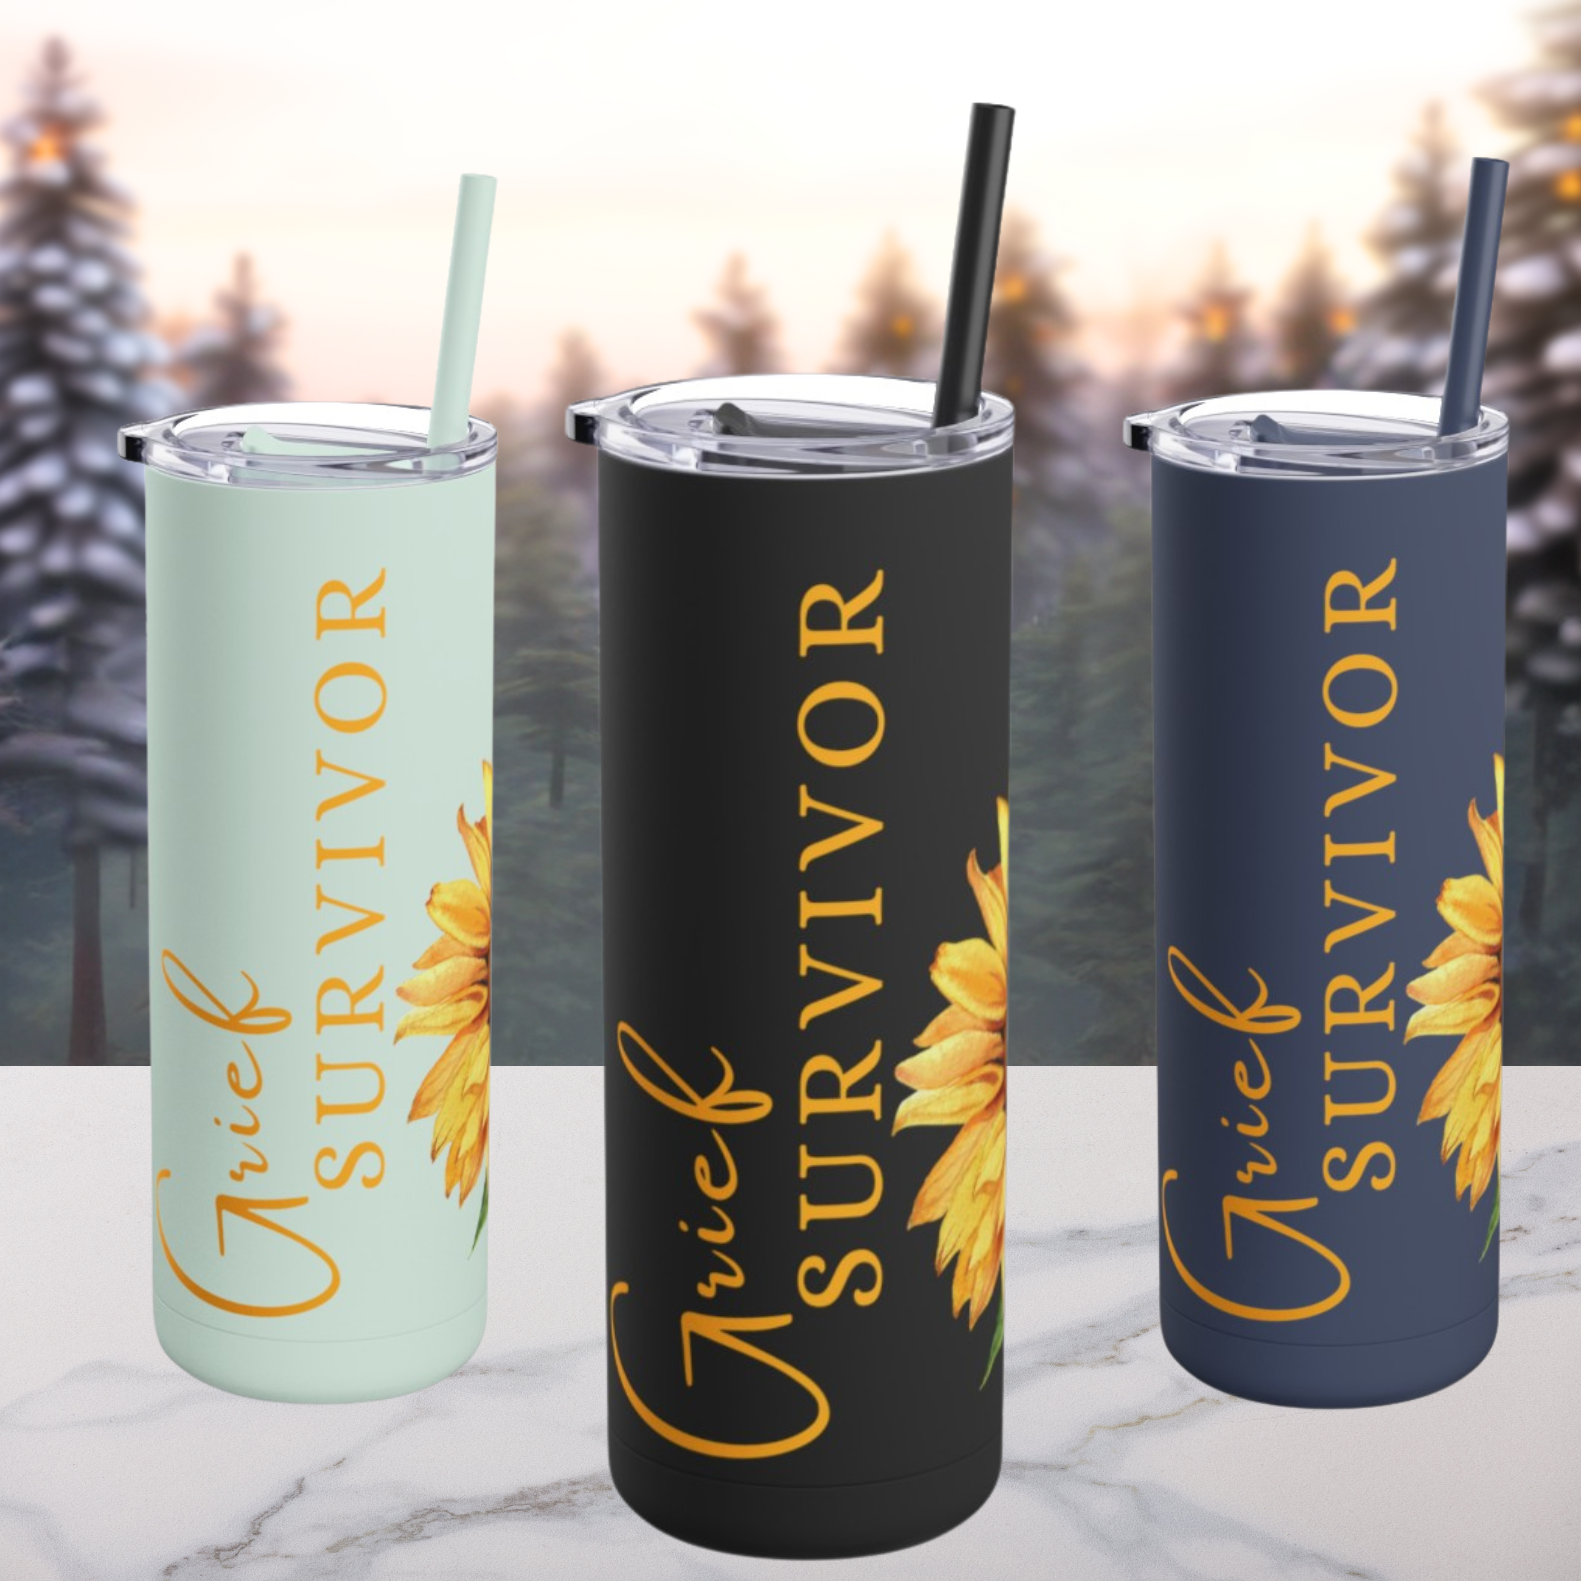 Available in 3 colors, this Grief Survivor Sunflower design 20 oz tumbler makes the perfect sympathy gift. 